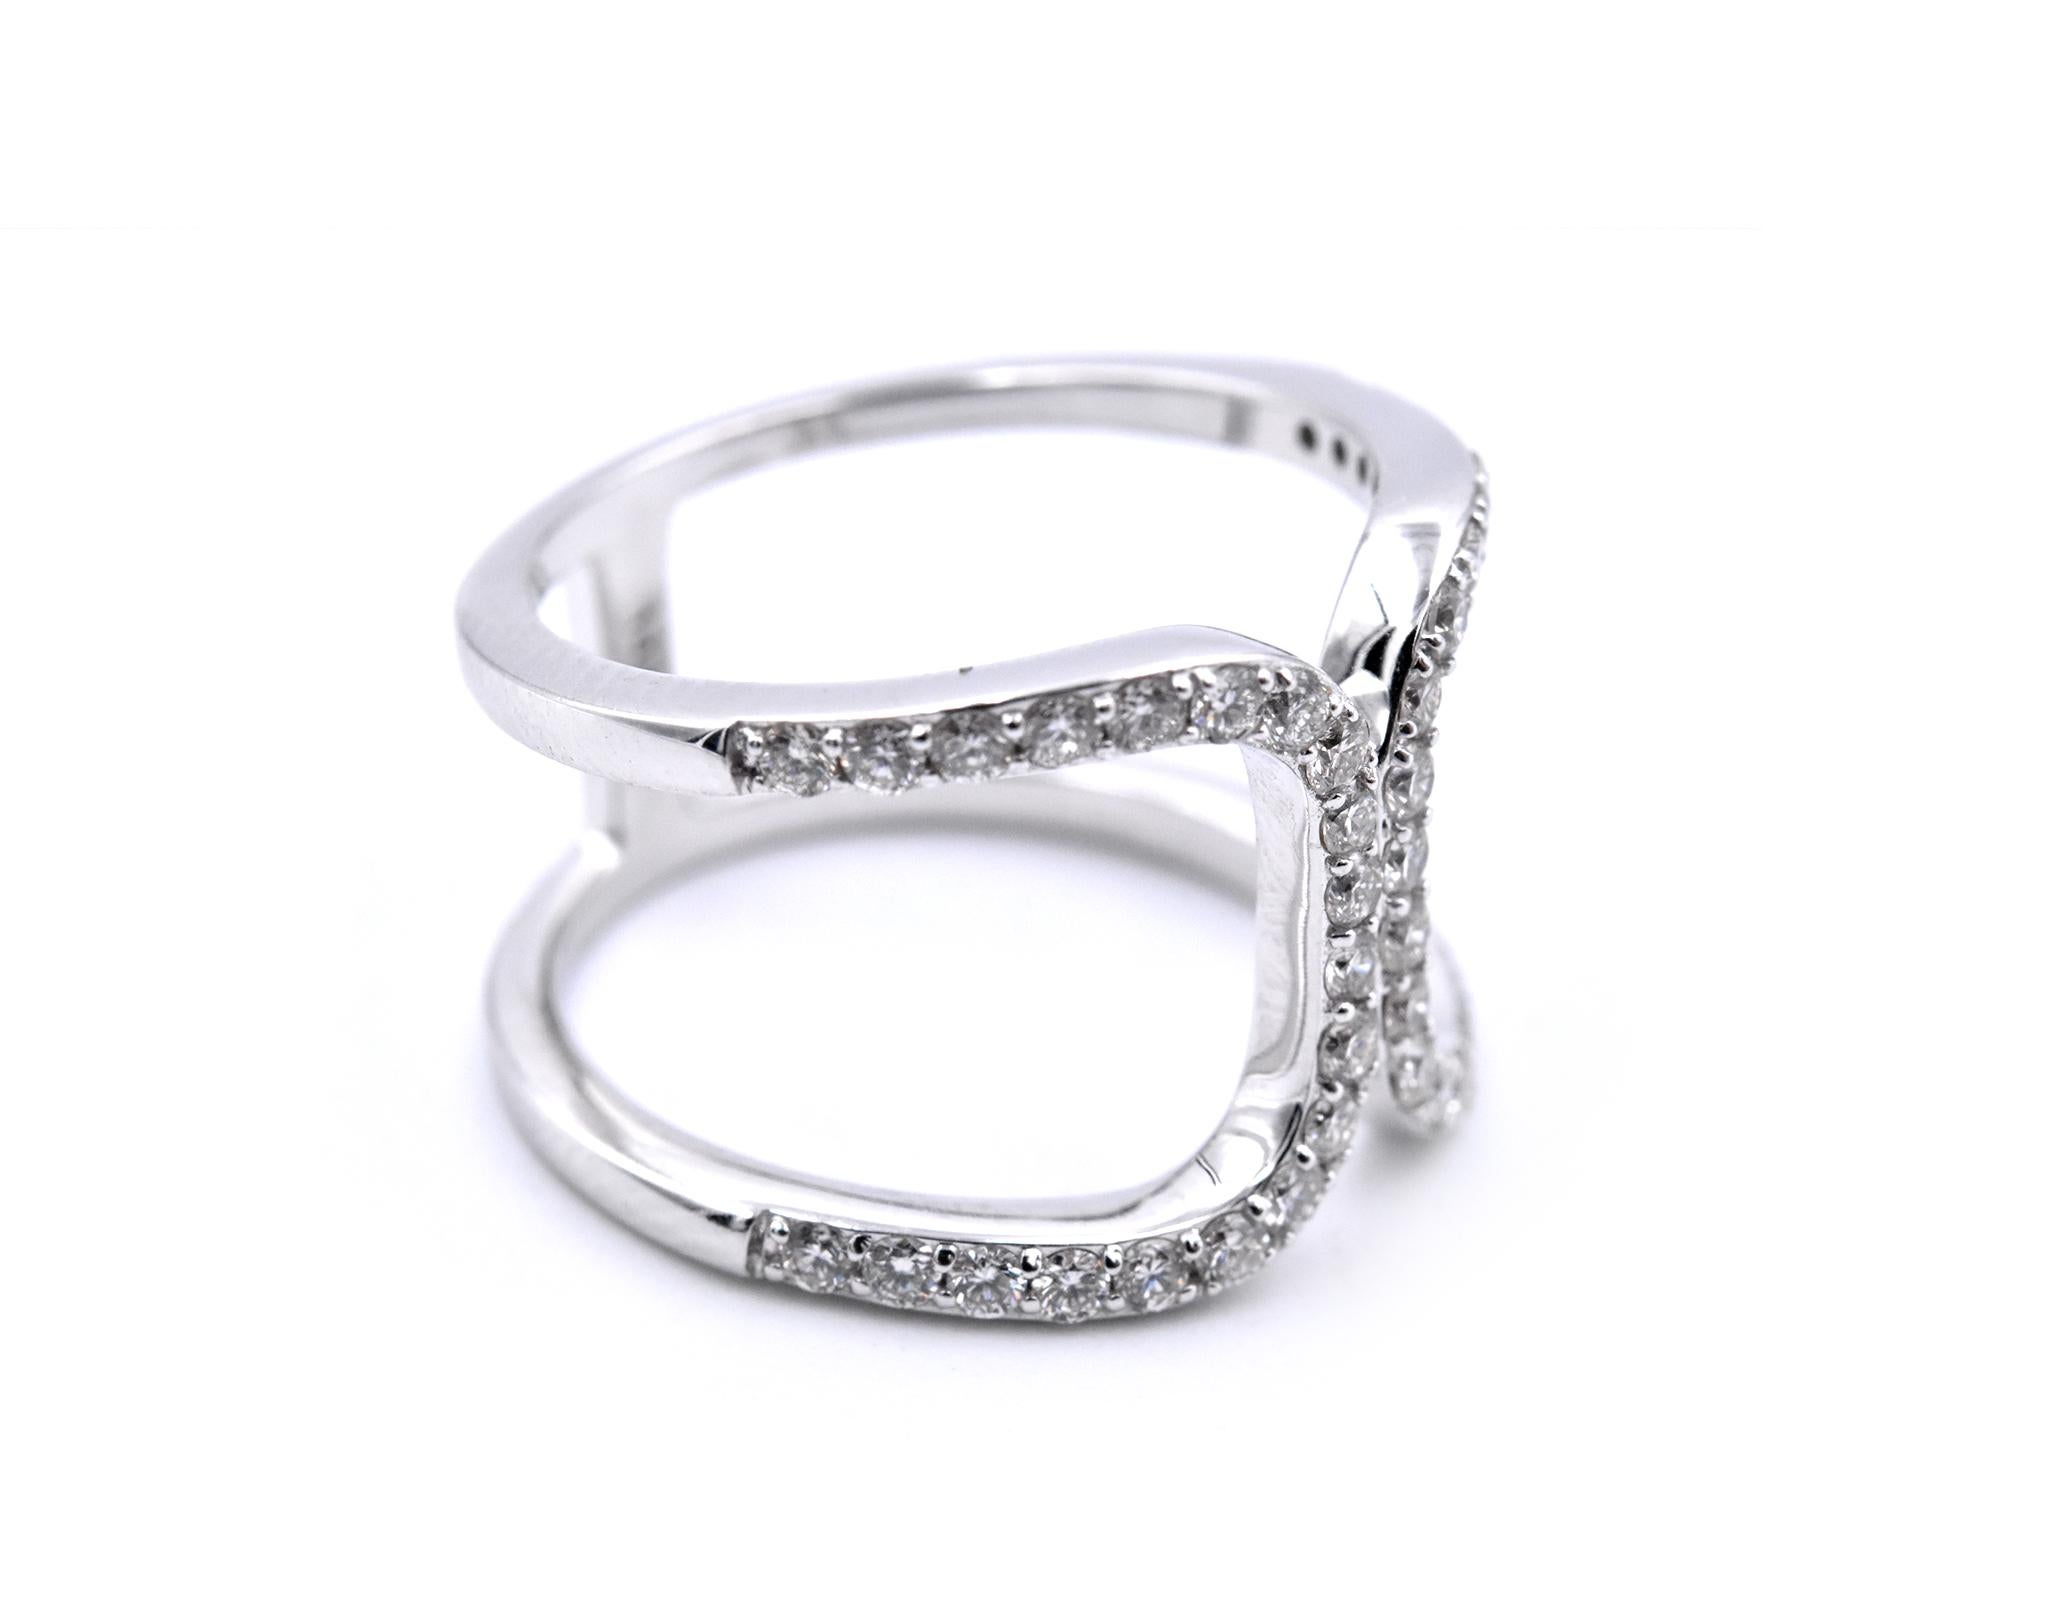 Material: 14k white gold
Diamonds: 40 round brilliant cuts = .75cttw
Color: G-H	
Clarity: VS
Ring size: 8 (please allow two additional shipping days for sizing requests) 
Dimensions: 22.33mm x 14.07mm
Weight: 5.5 4grams 